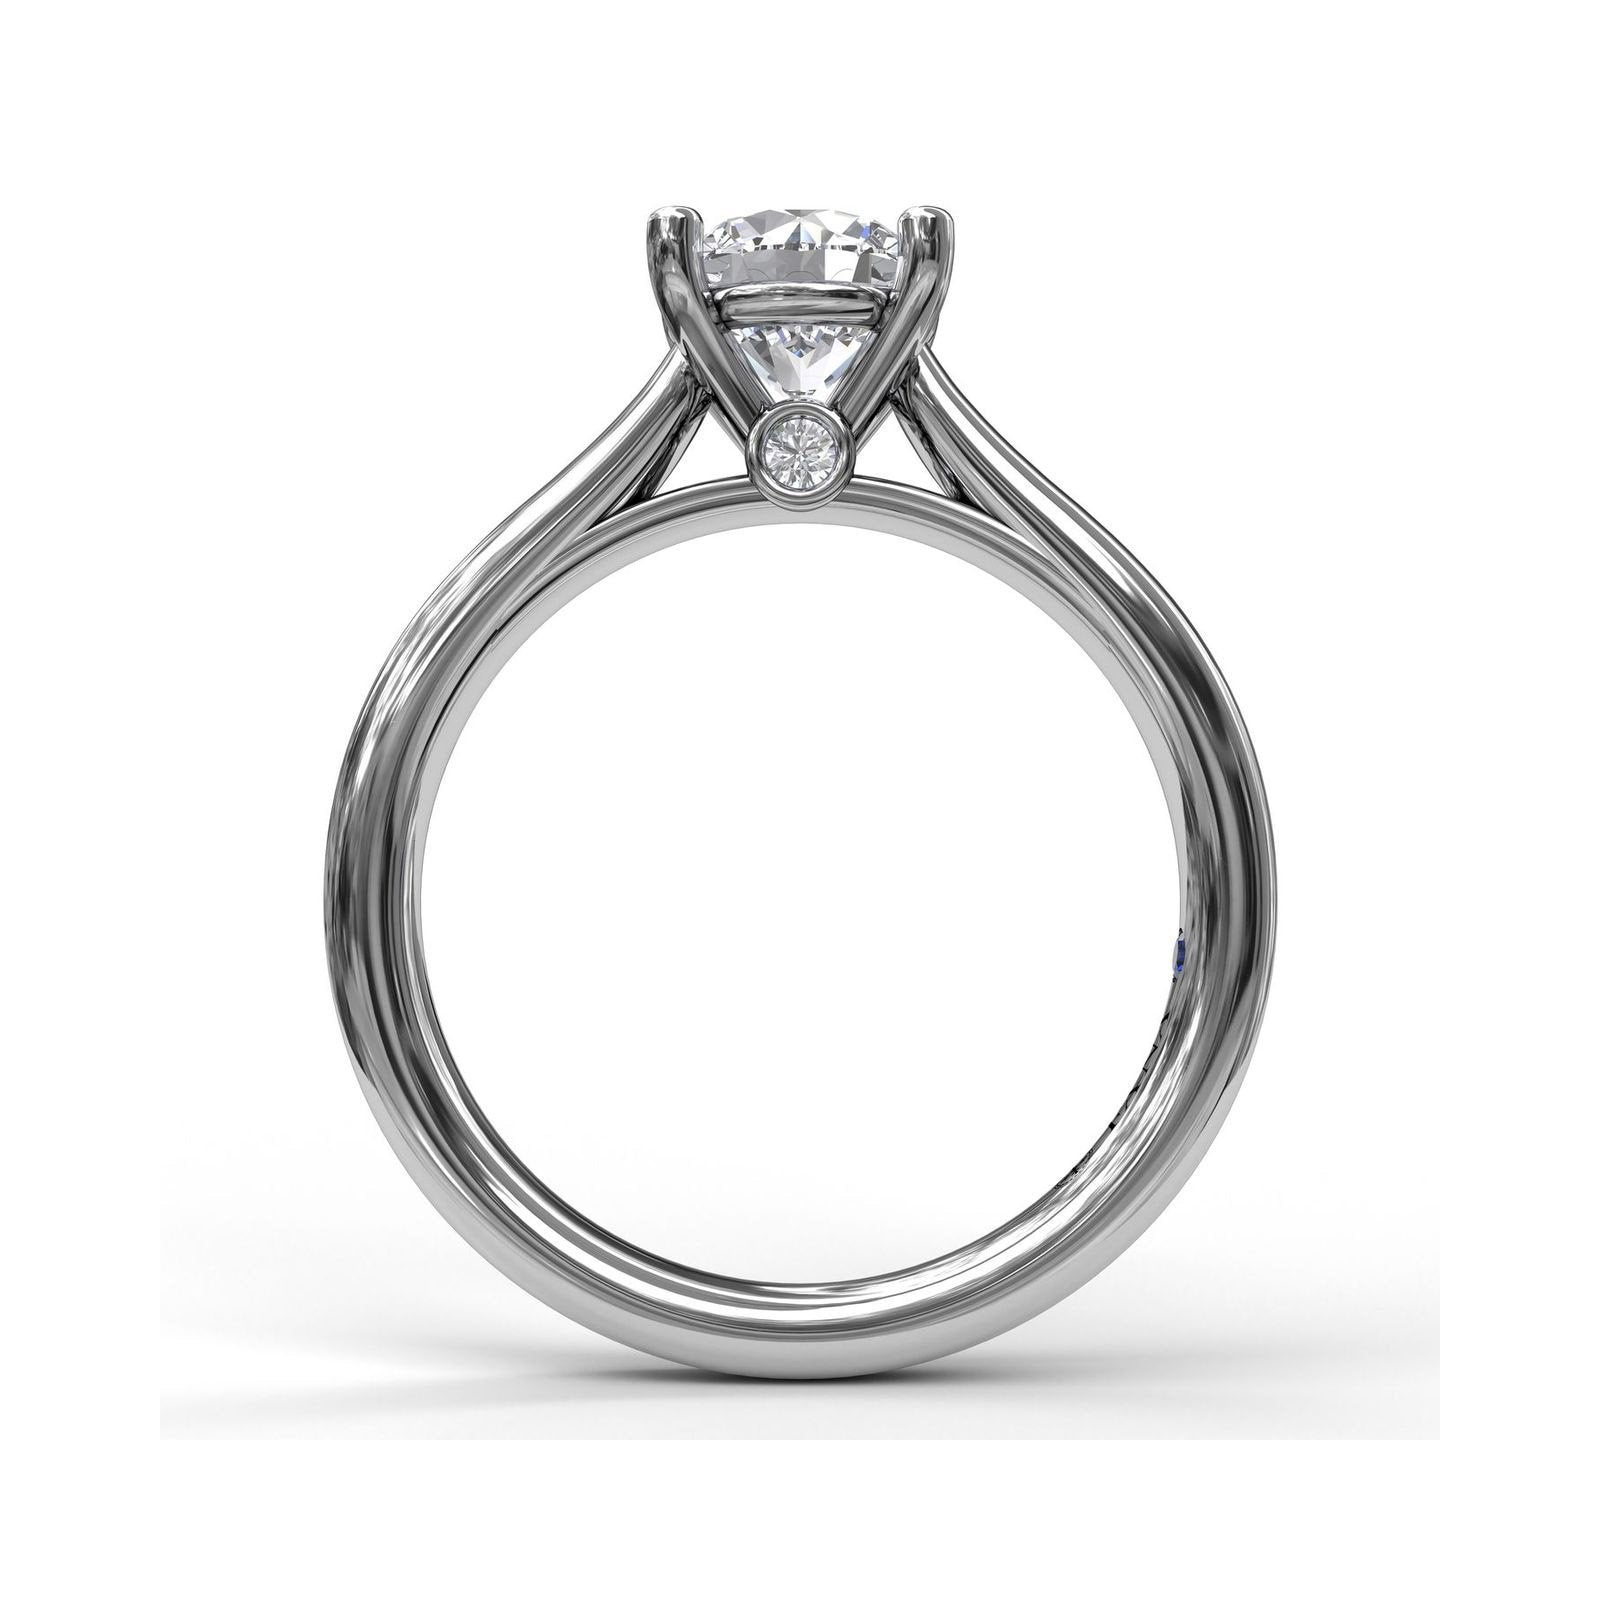 FANA Solitaire Diamond Engagement Ring